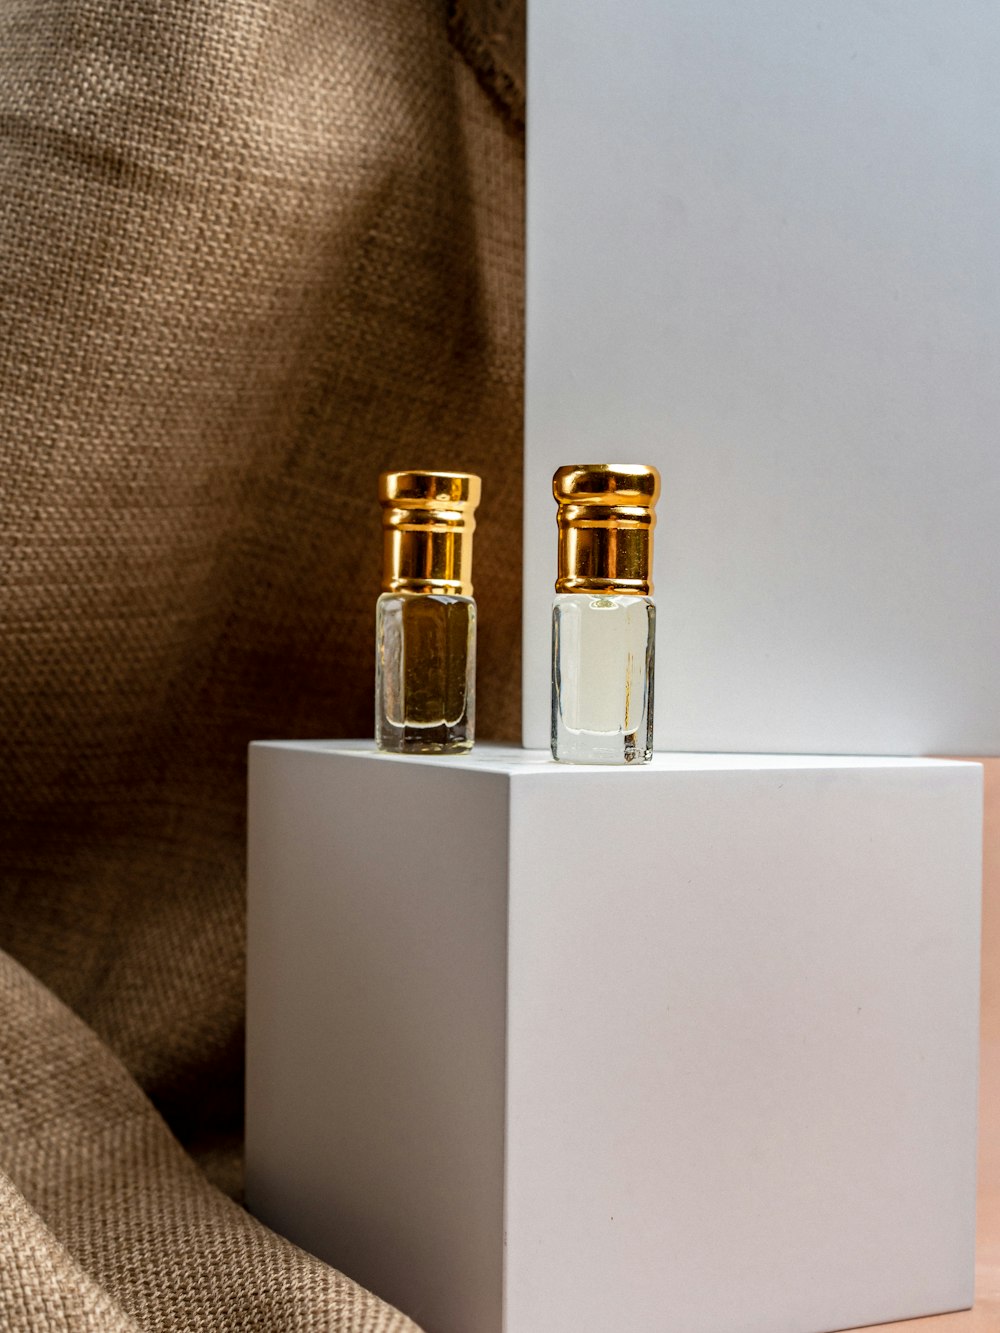 two bottles of perfume sitting on top of a white box